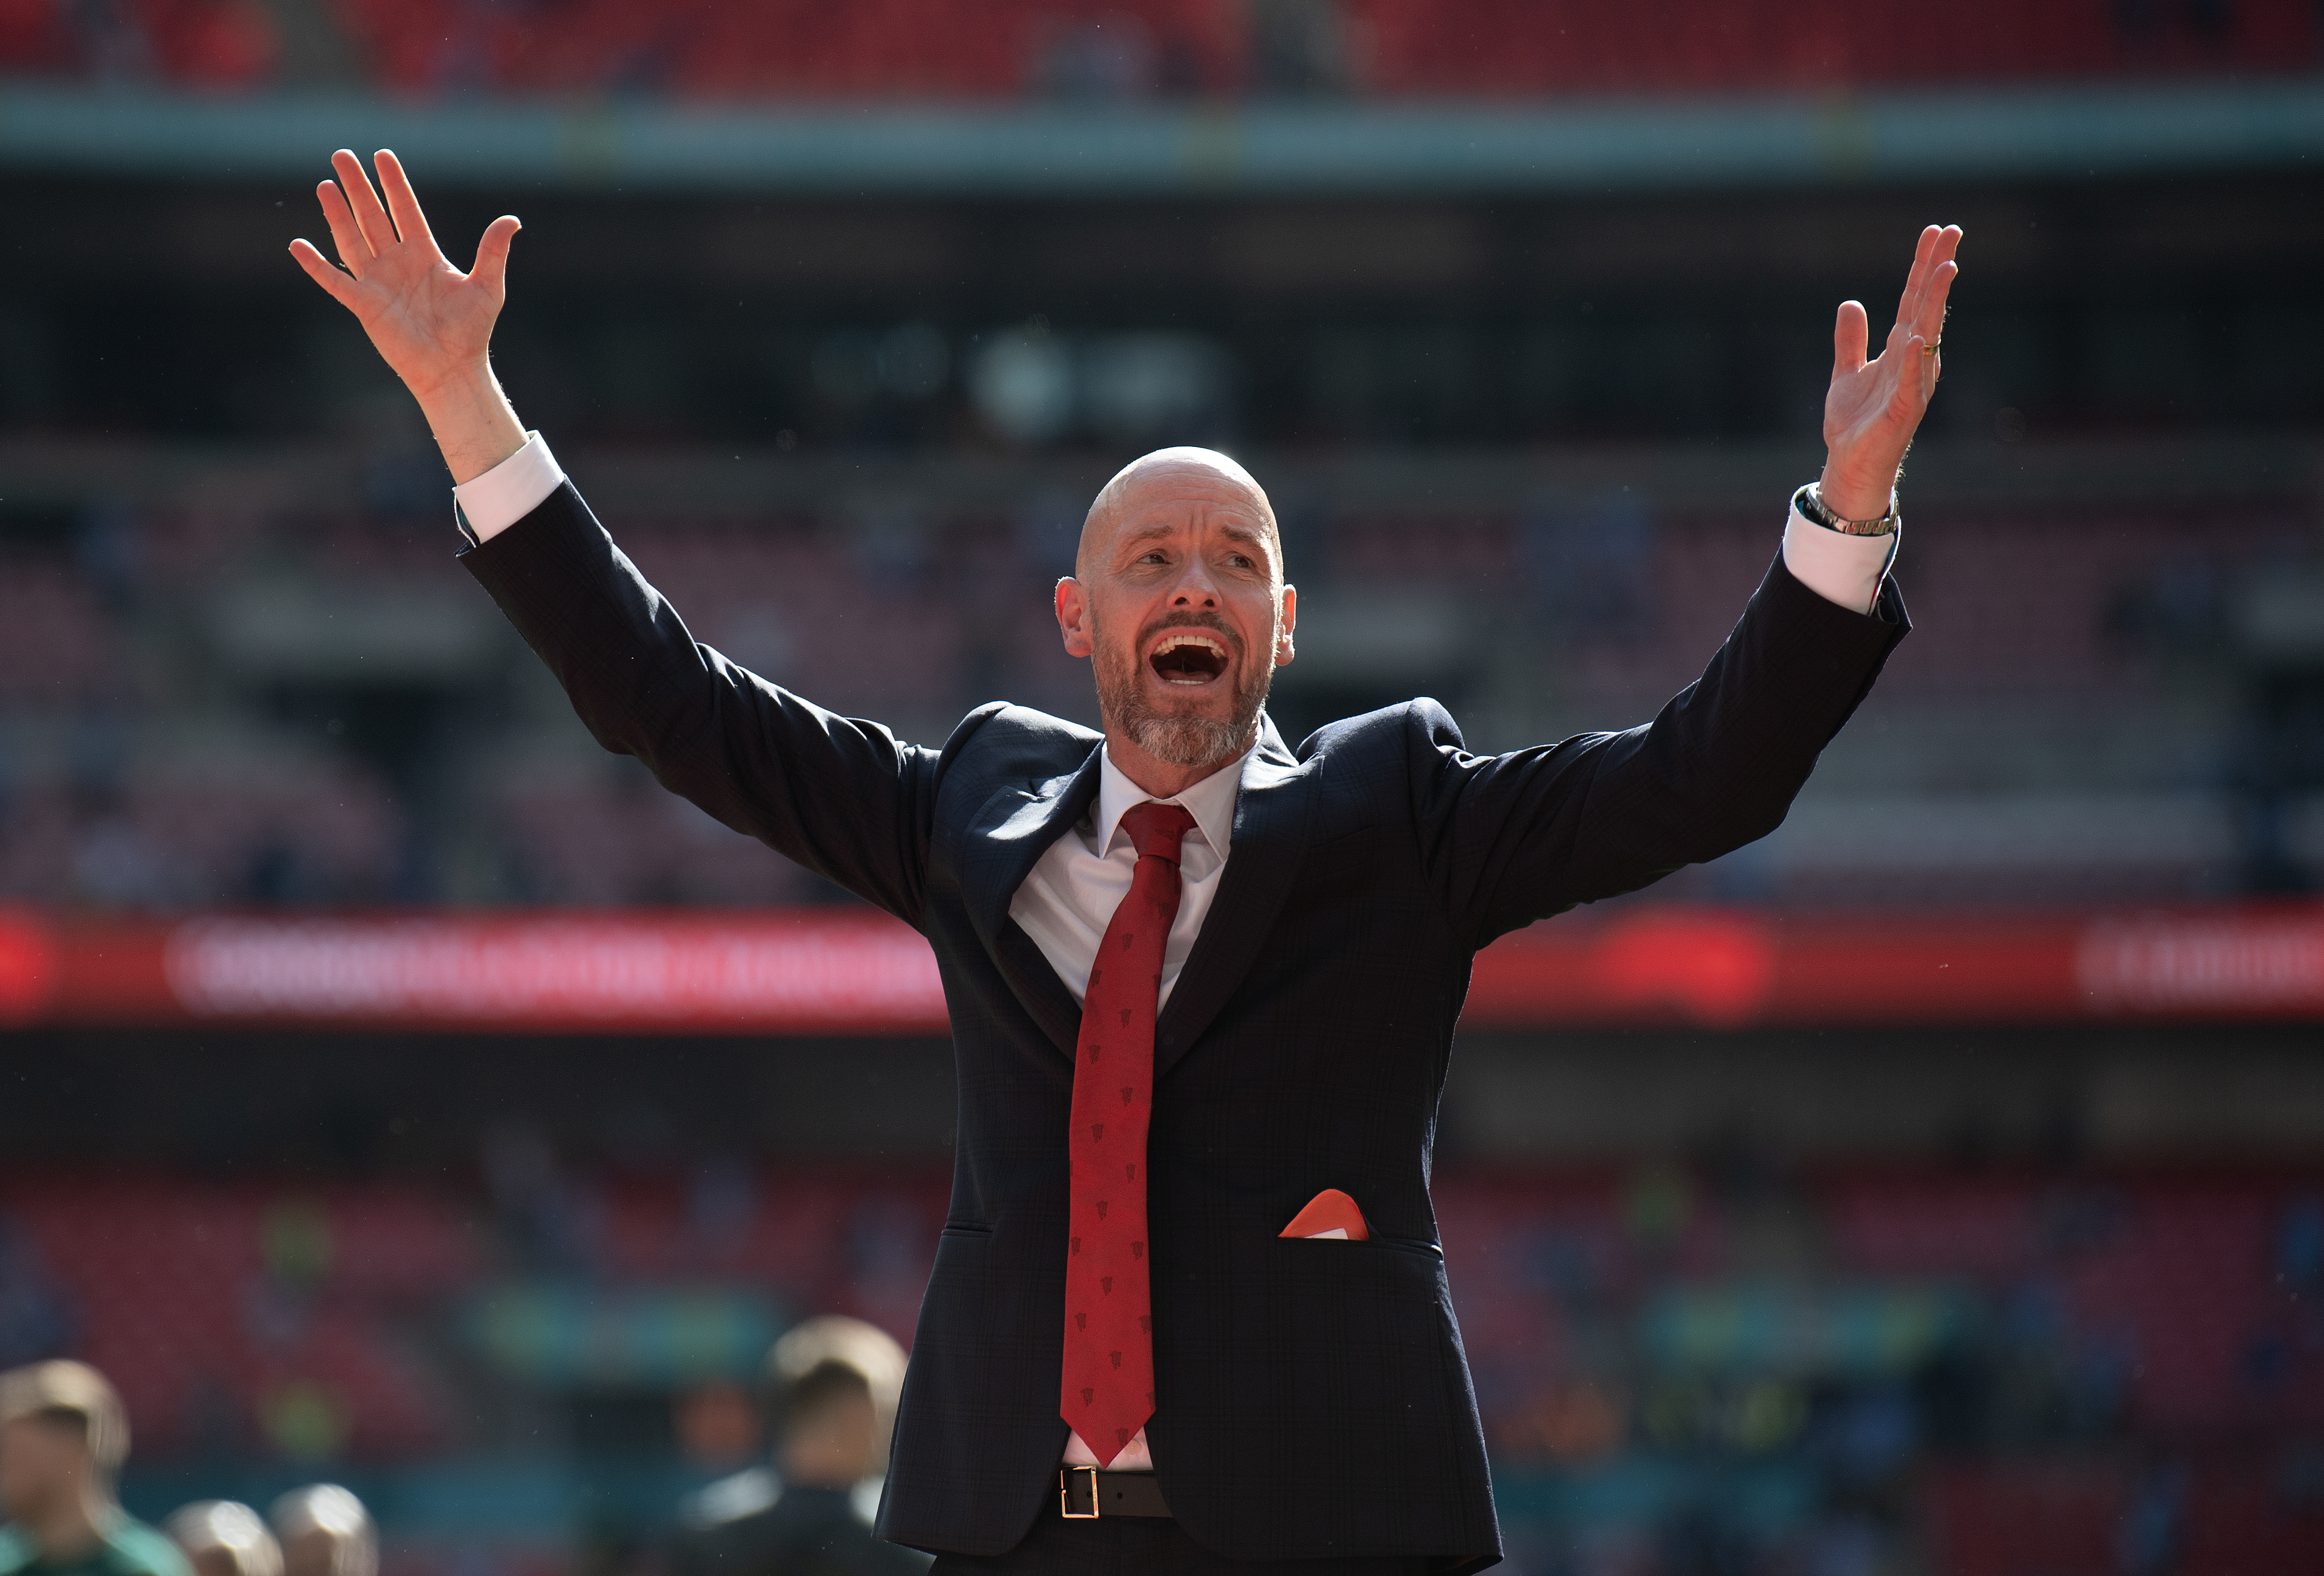 Erik ten Hag is set to remain as manager of Manchester United